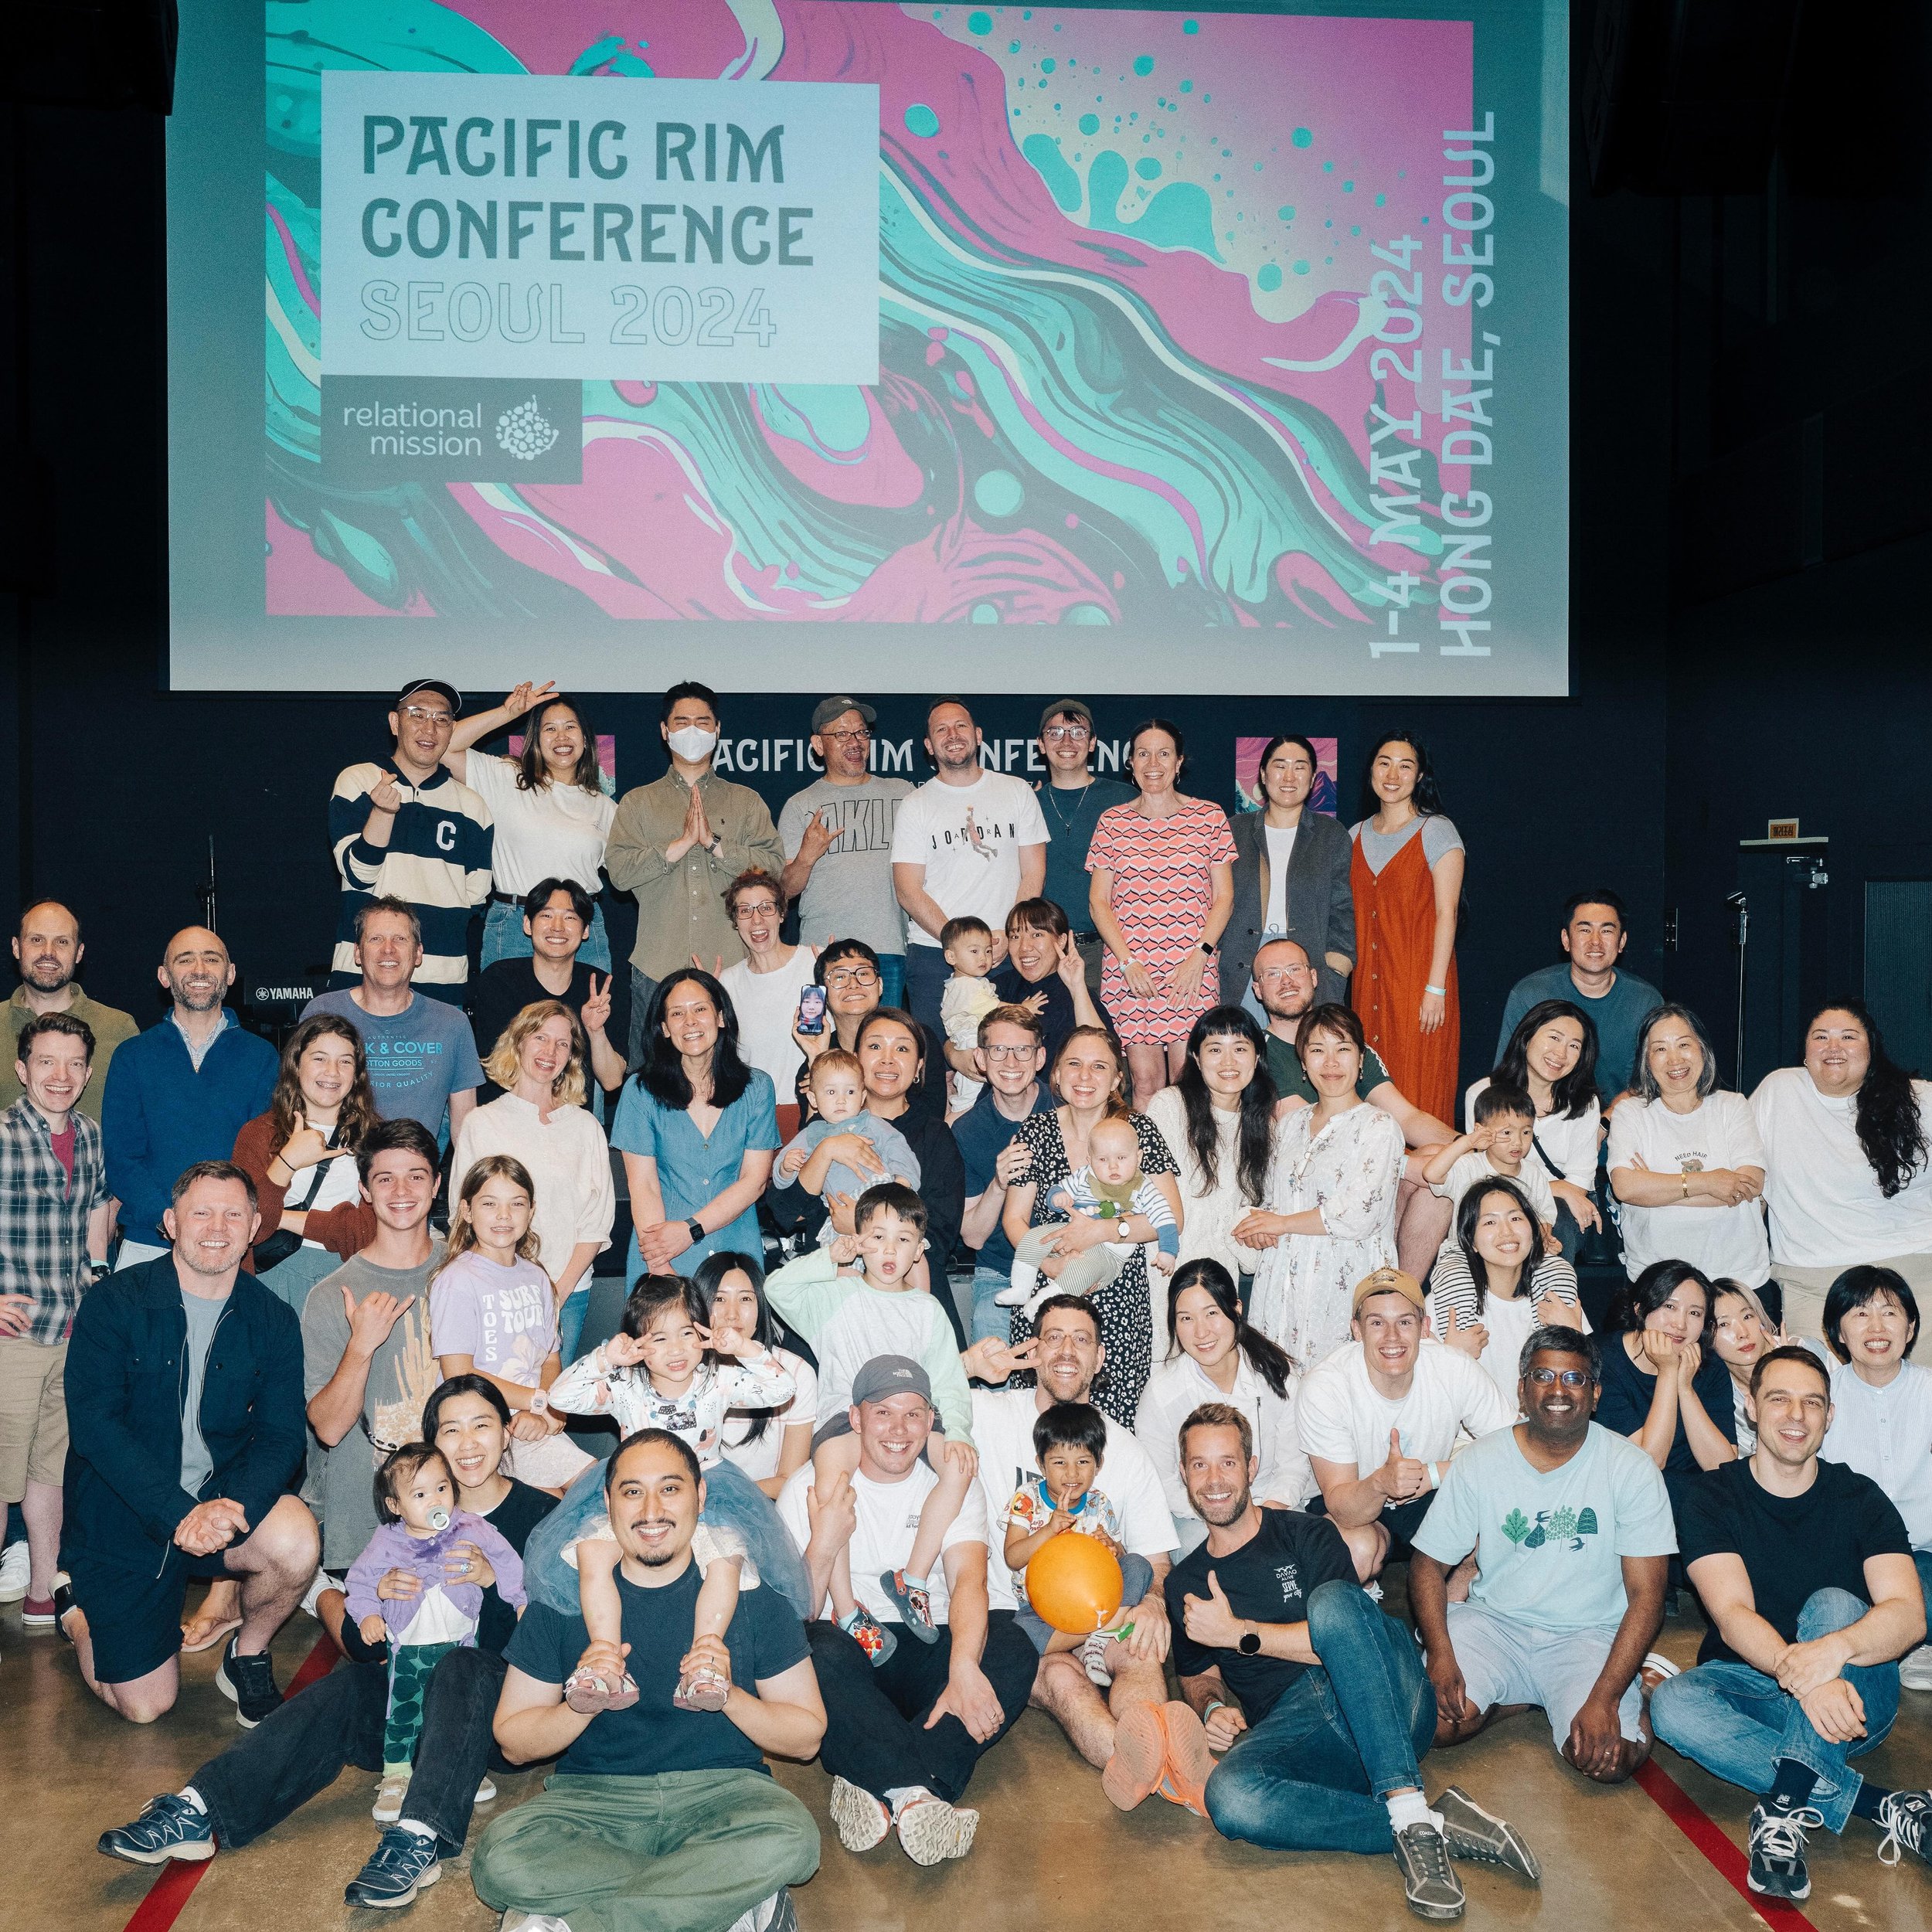 Pacific Rim Conference Feedback
 
https://redeemerchurchcolchester.org/blog/pacificrim-conference

A re-post from David Bareham

#pacificrim #conference #mission #churchplanting